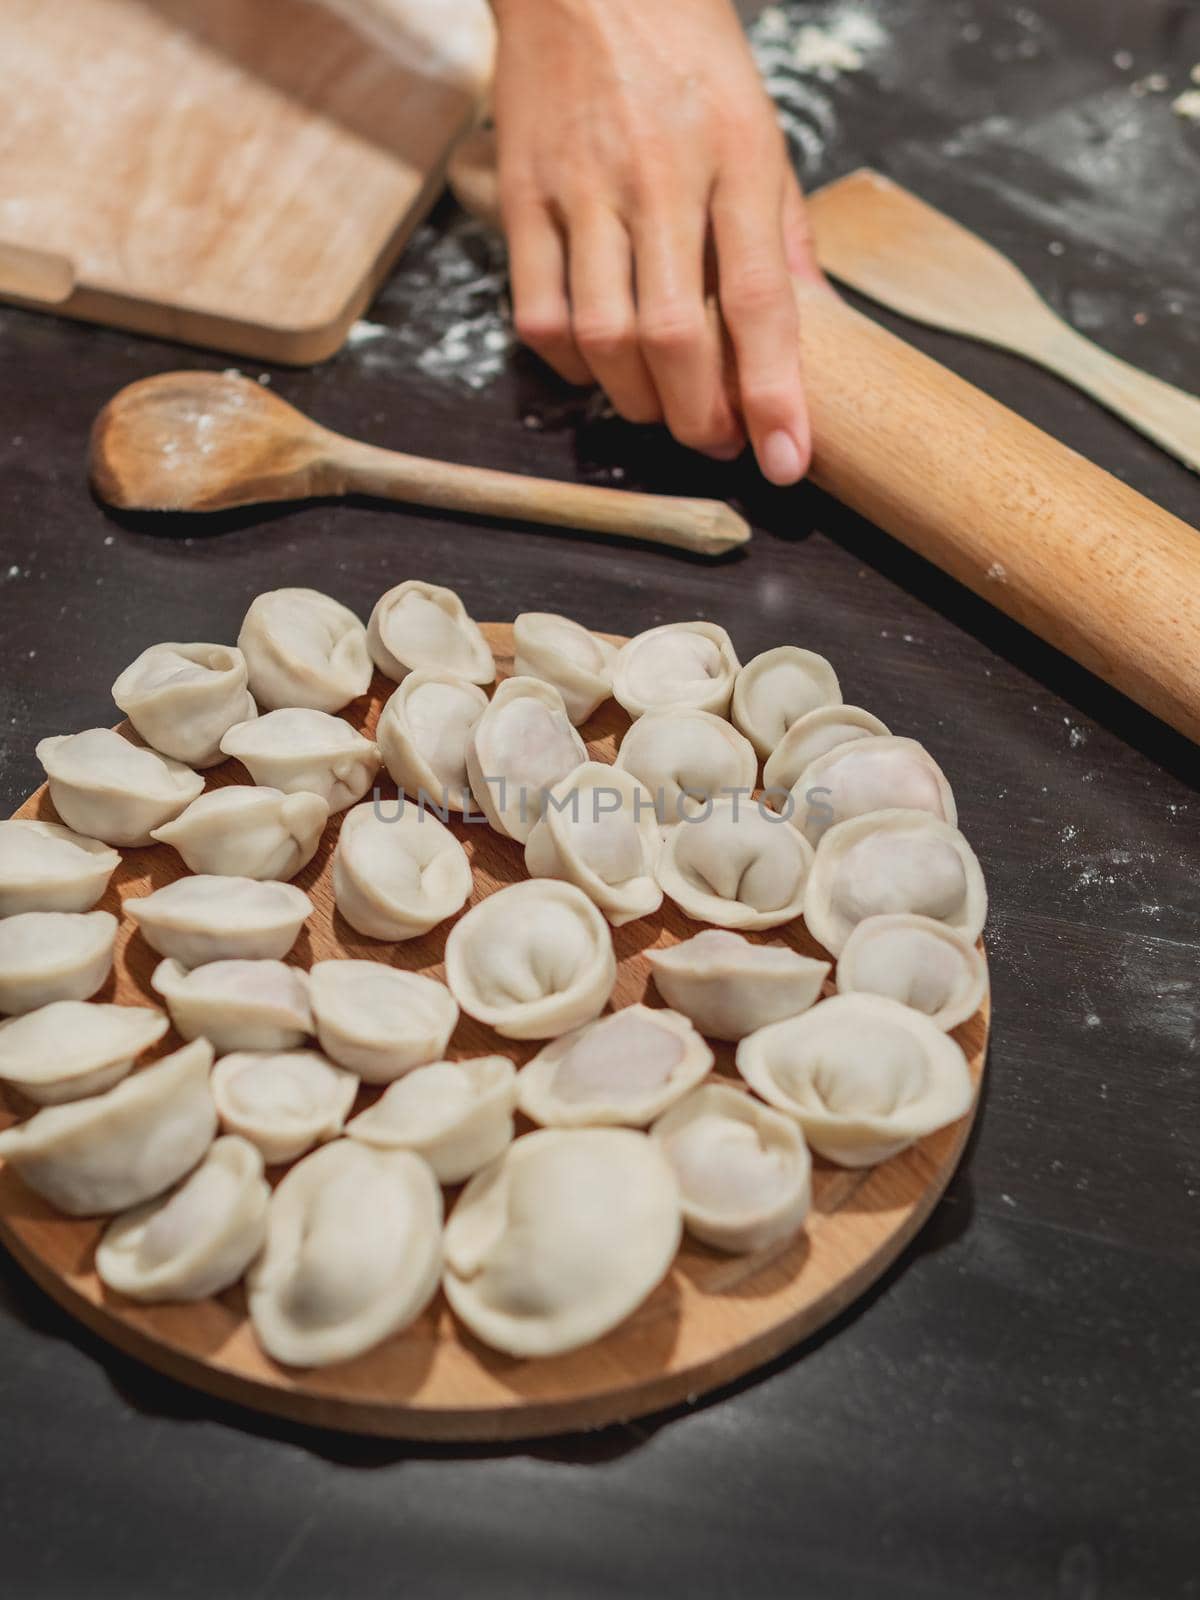 Woman makes pelmeni or dumplings - traditional dish of Russian cuisine made of dough and meat. Black kitchen table with flour and wooden utensils.